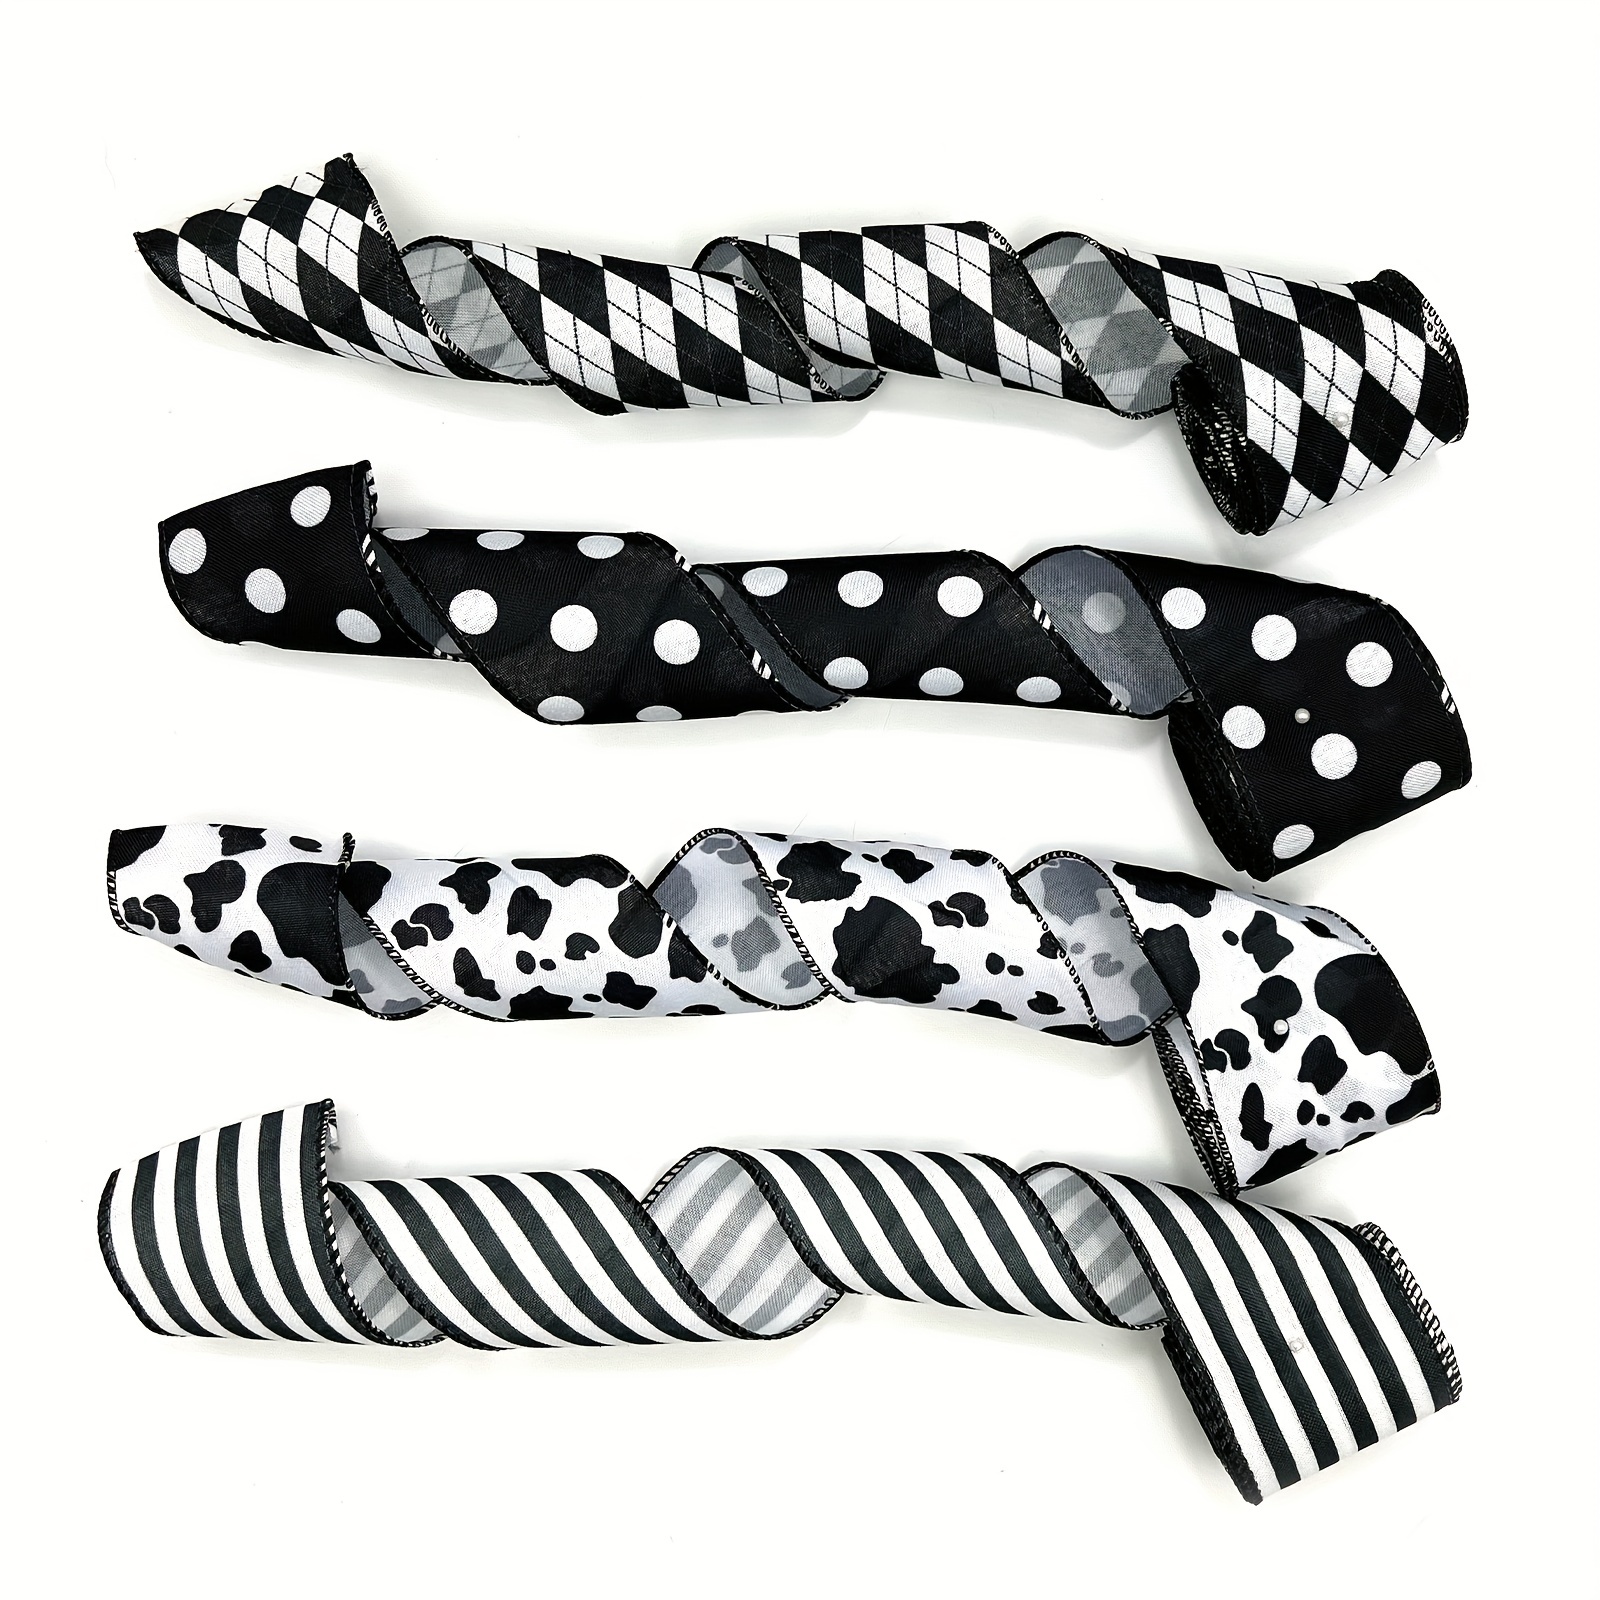 1 Inch Plaid Satin Ribbons Black and White Diamond Check Ribbon, 5 Yards  for DIY Craft Wrapping Bow Home Party Decor